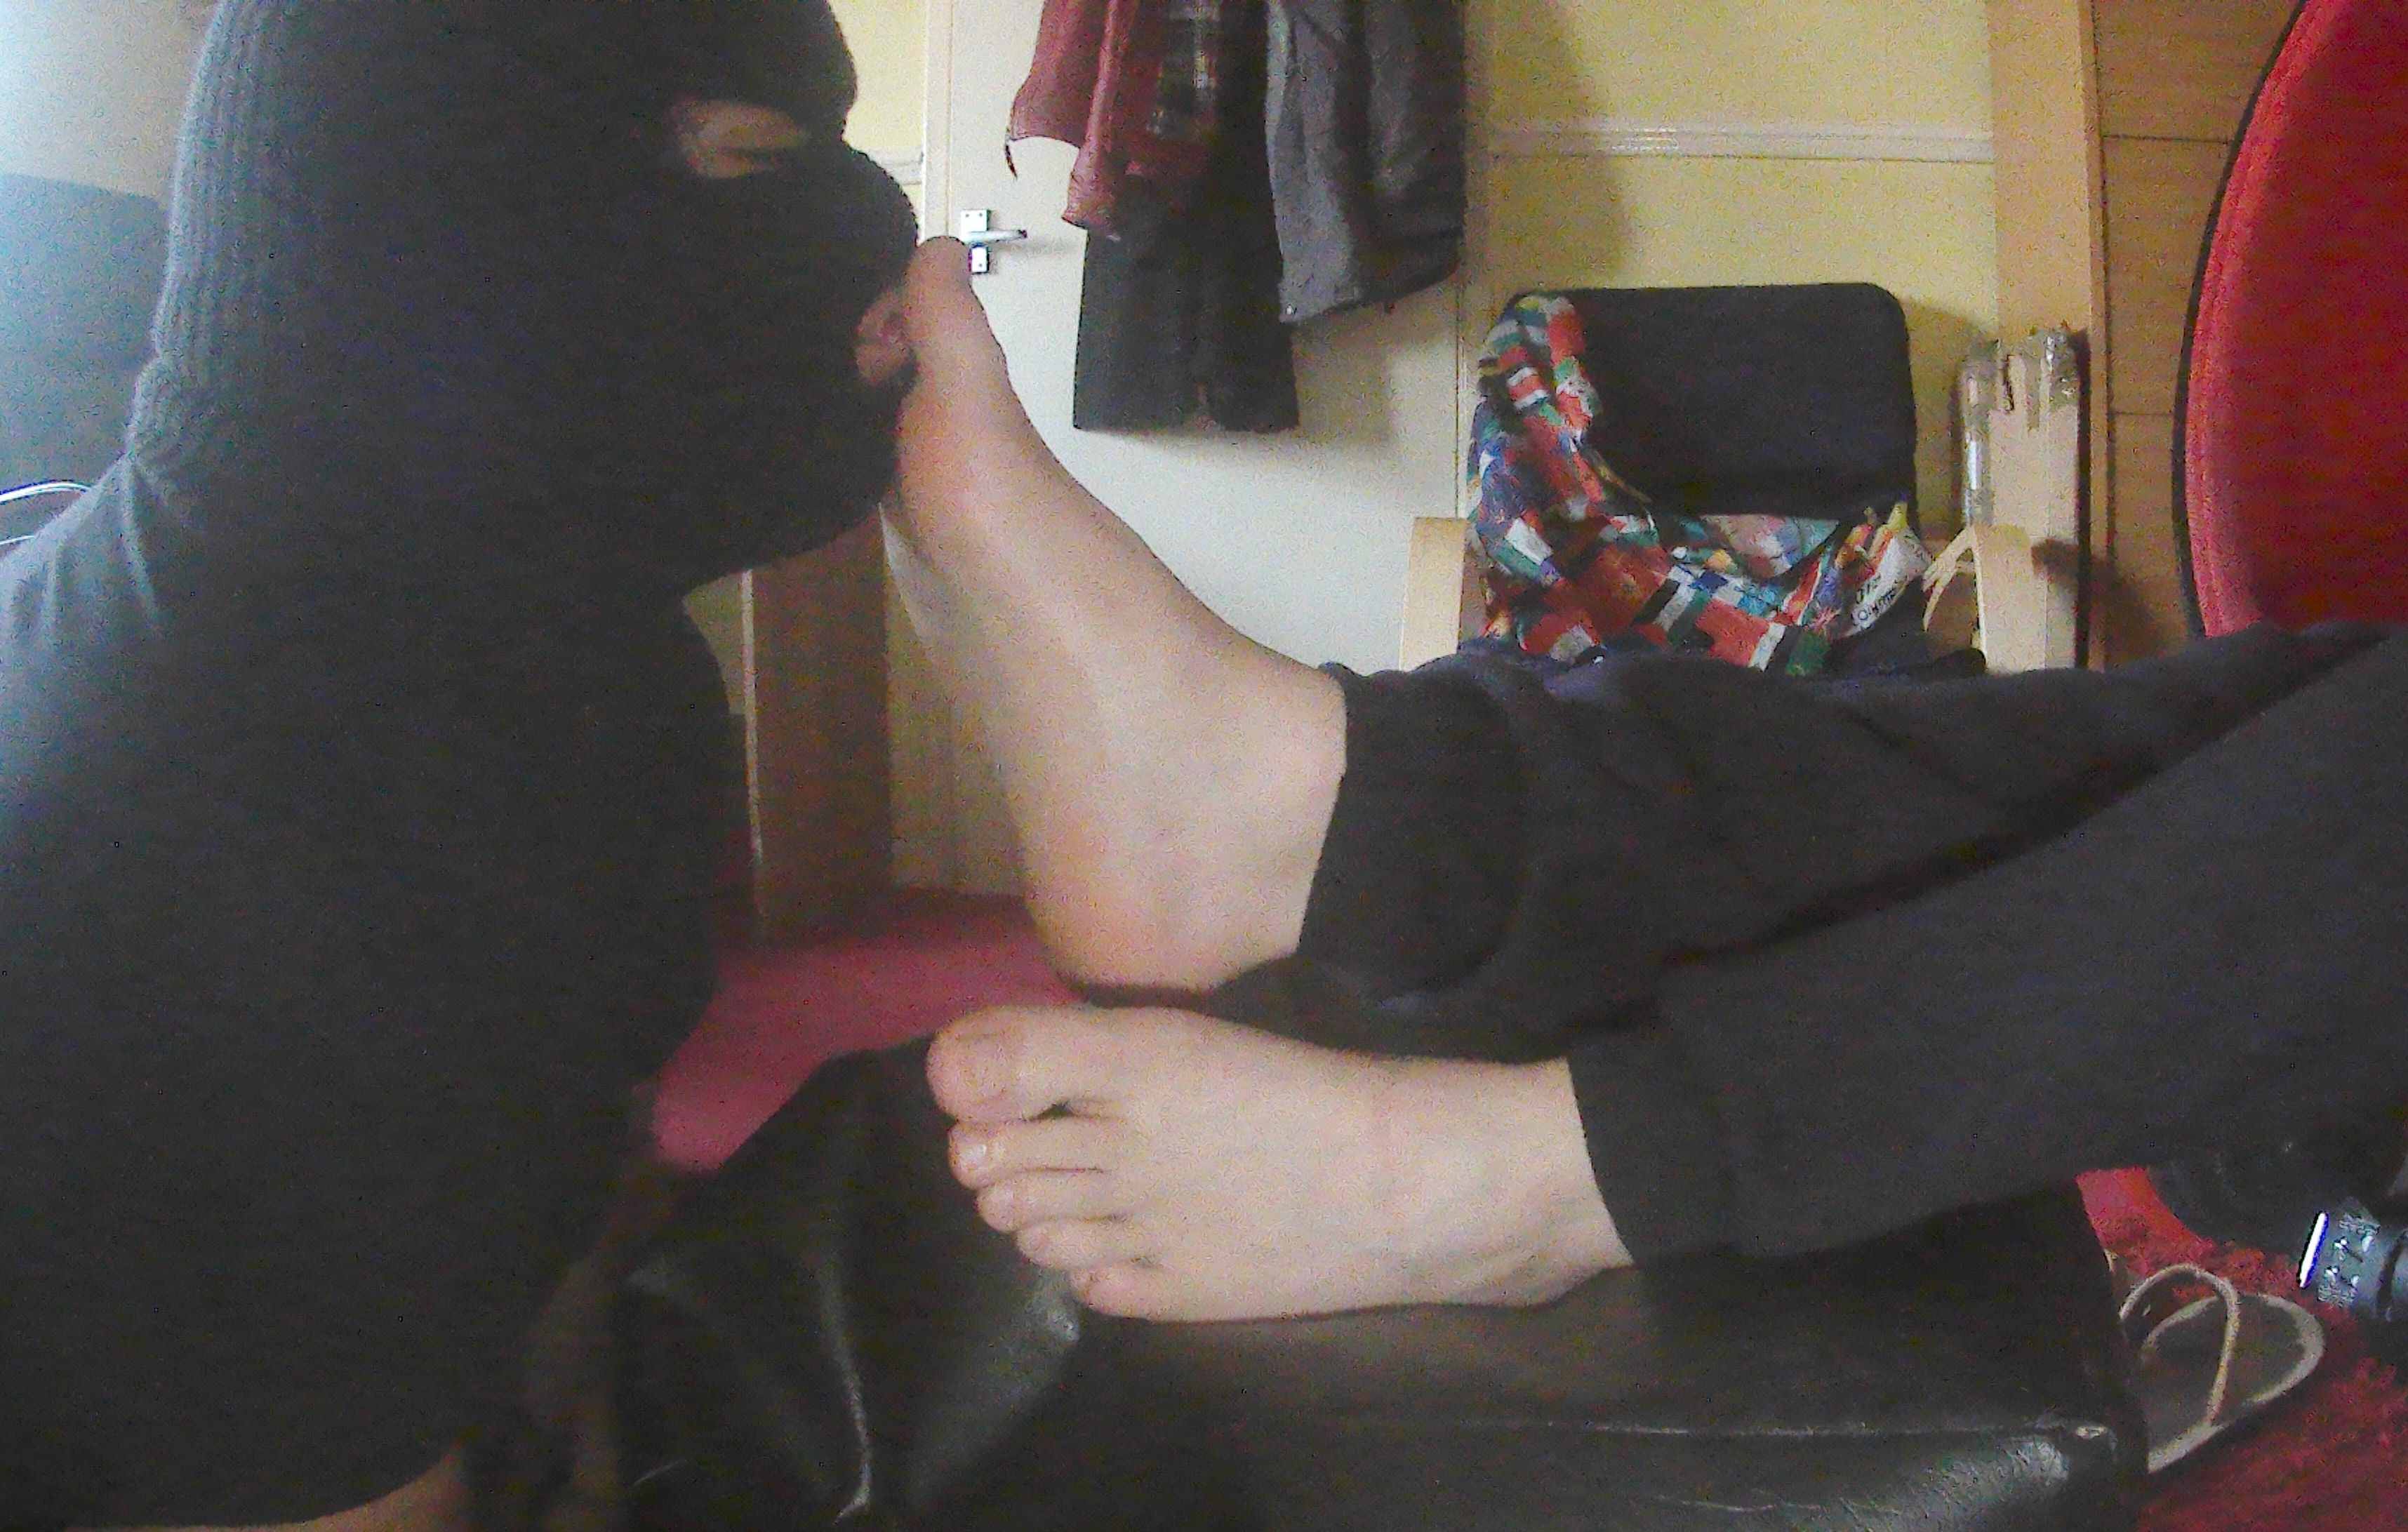 Multiple foot slaves licking, sniffing and worshipping